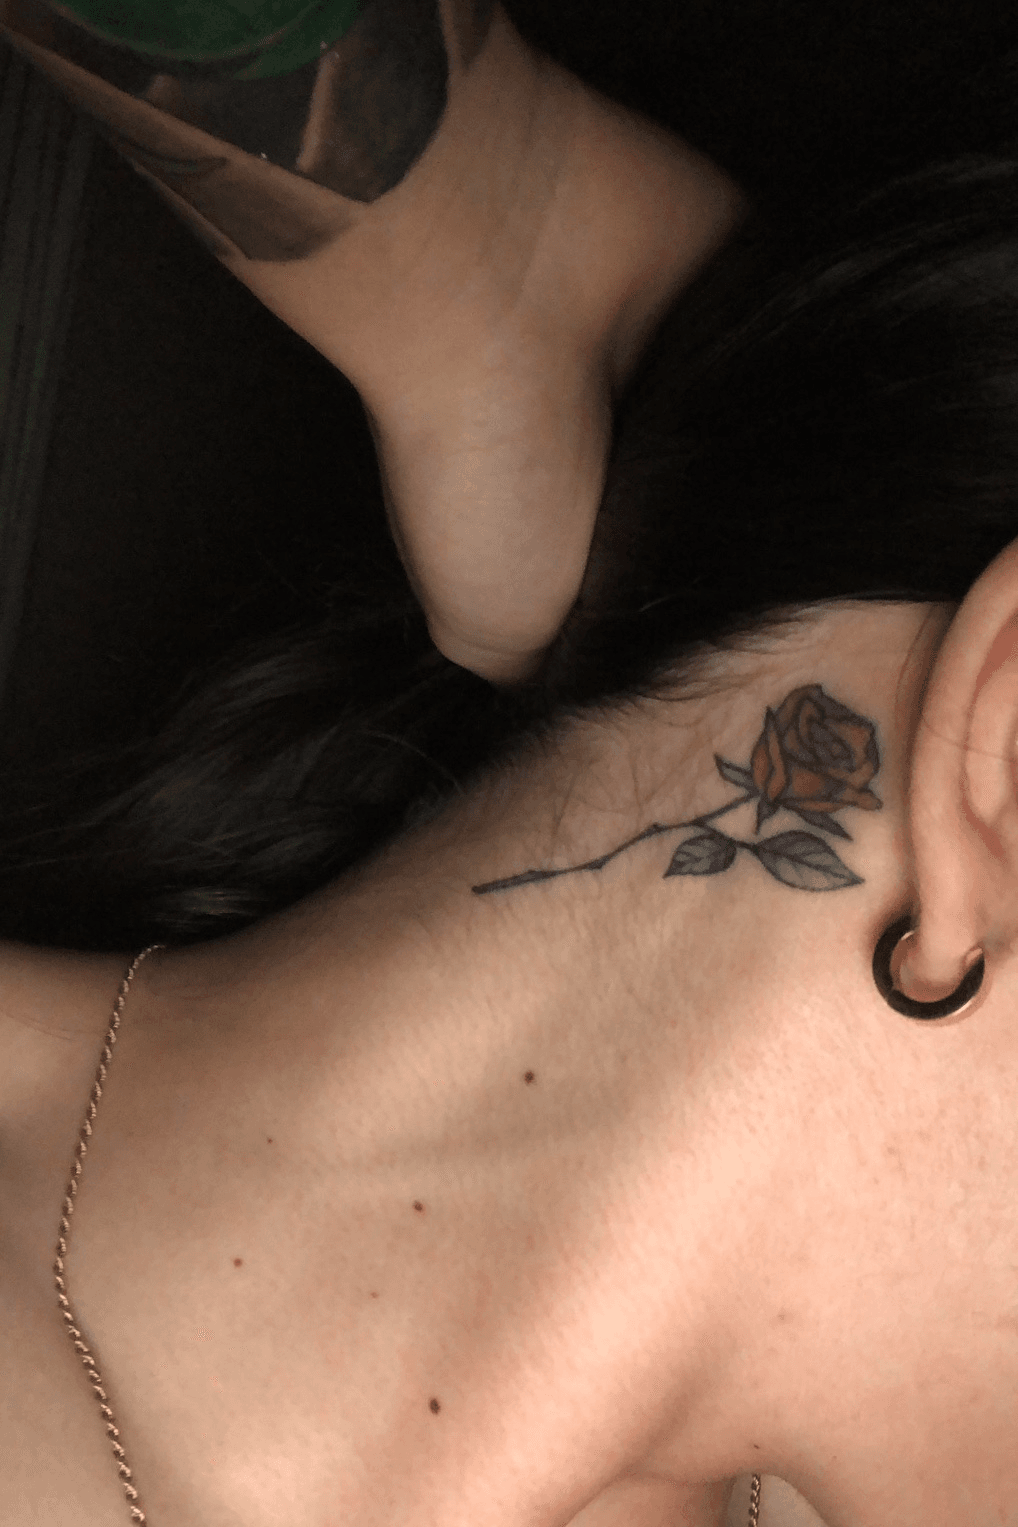 behind the ear tattoos tumblr for men